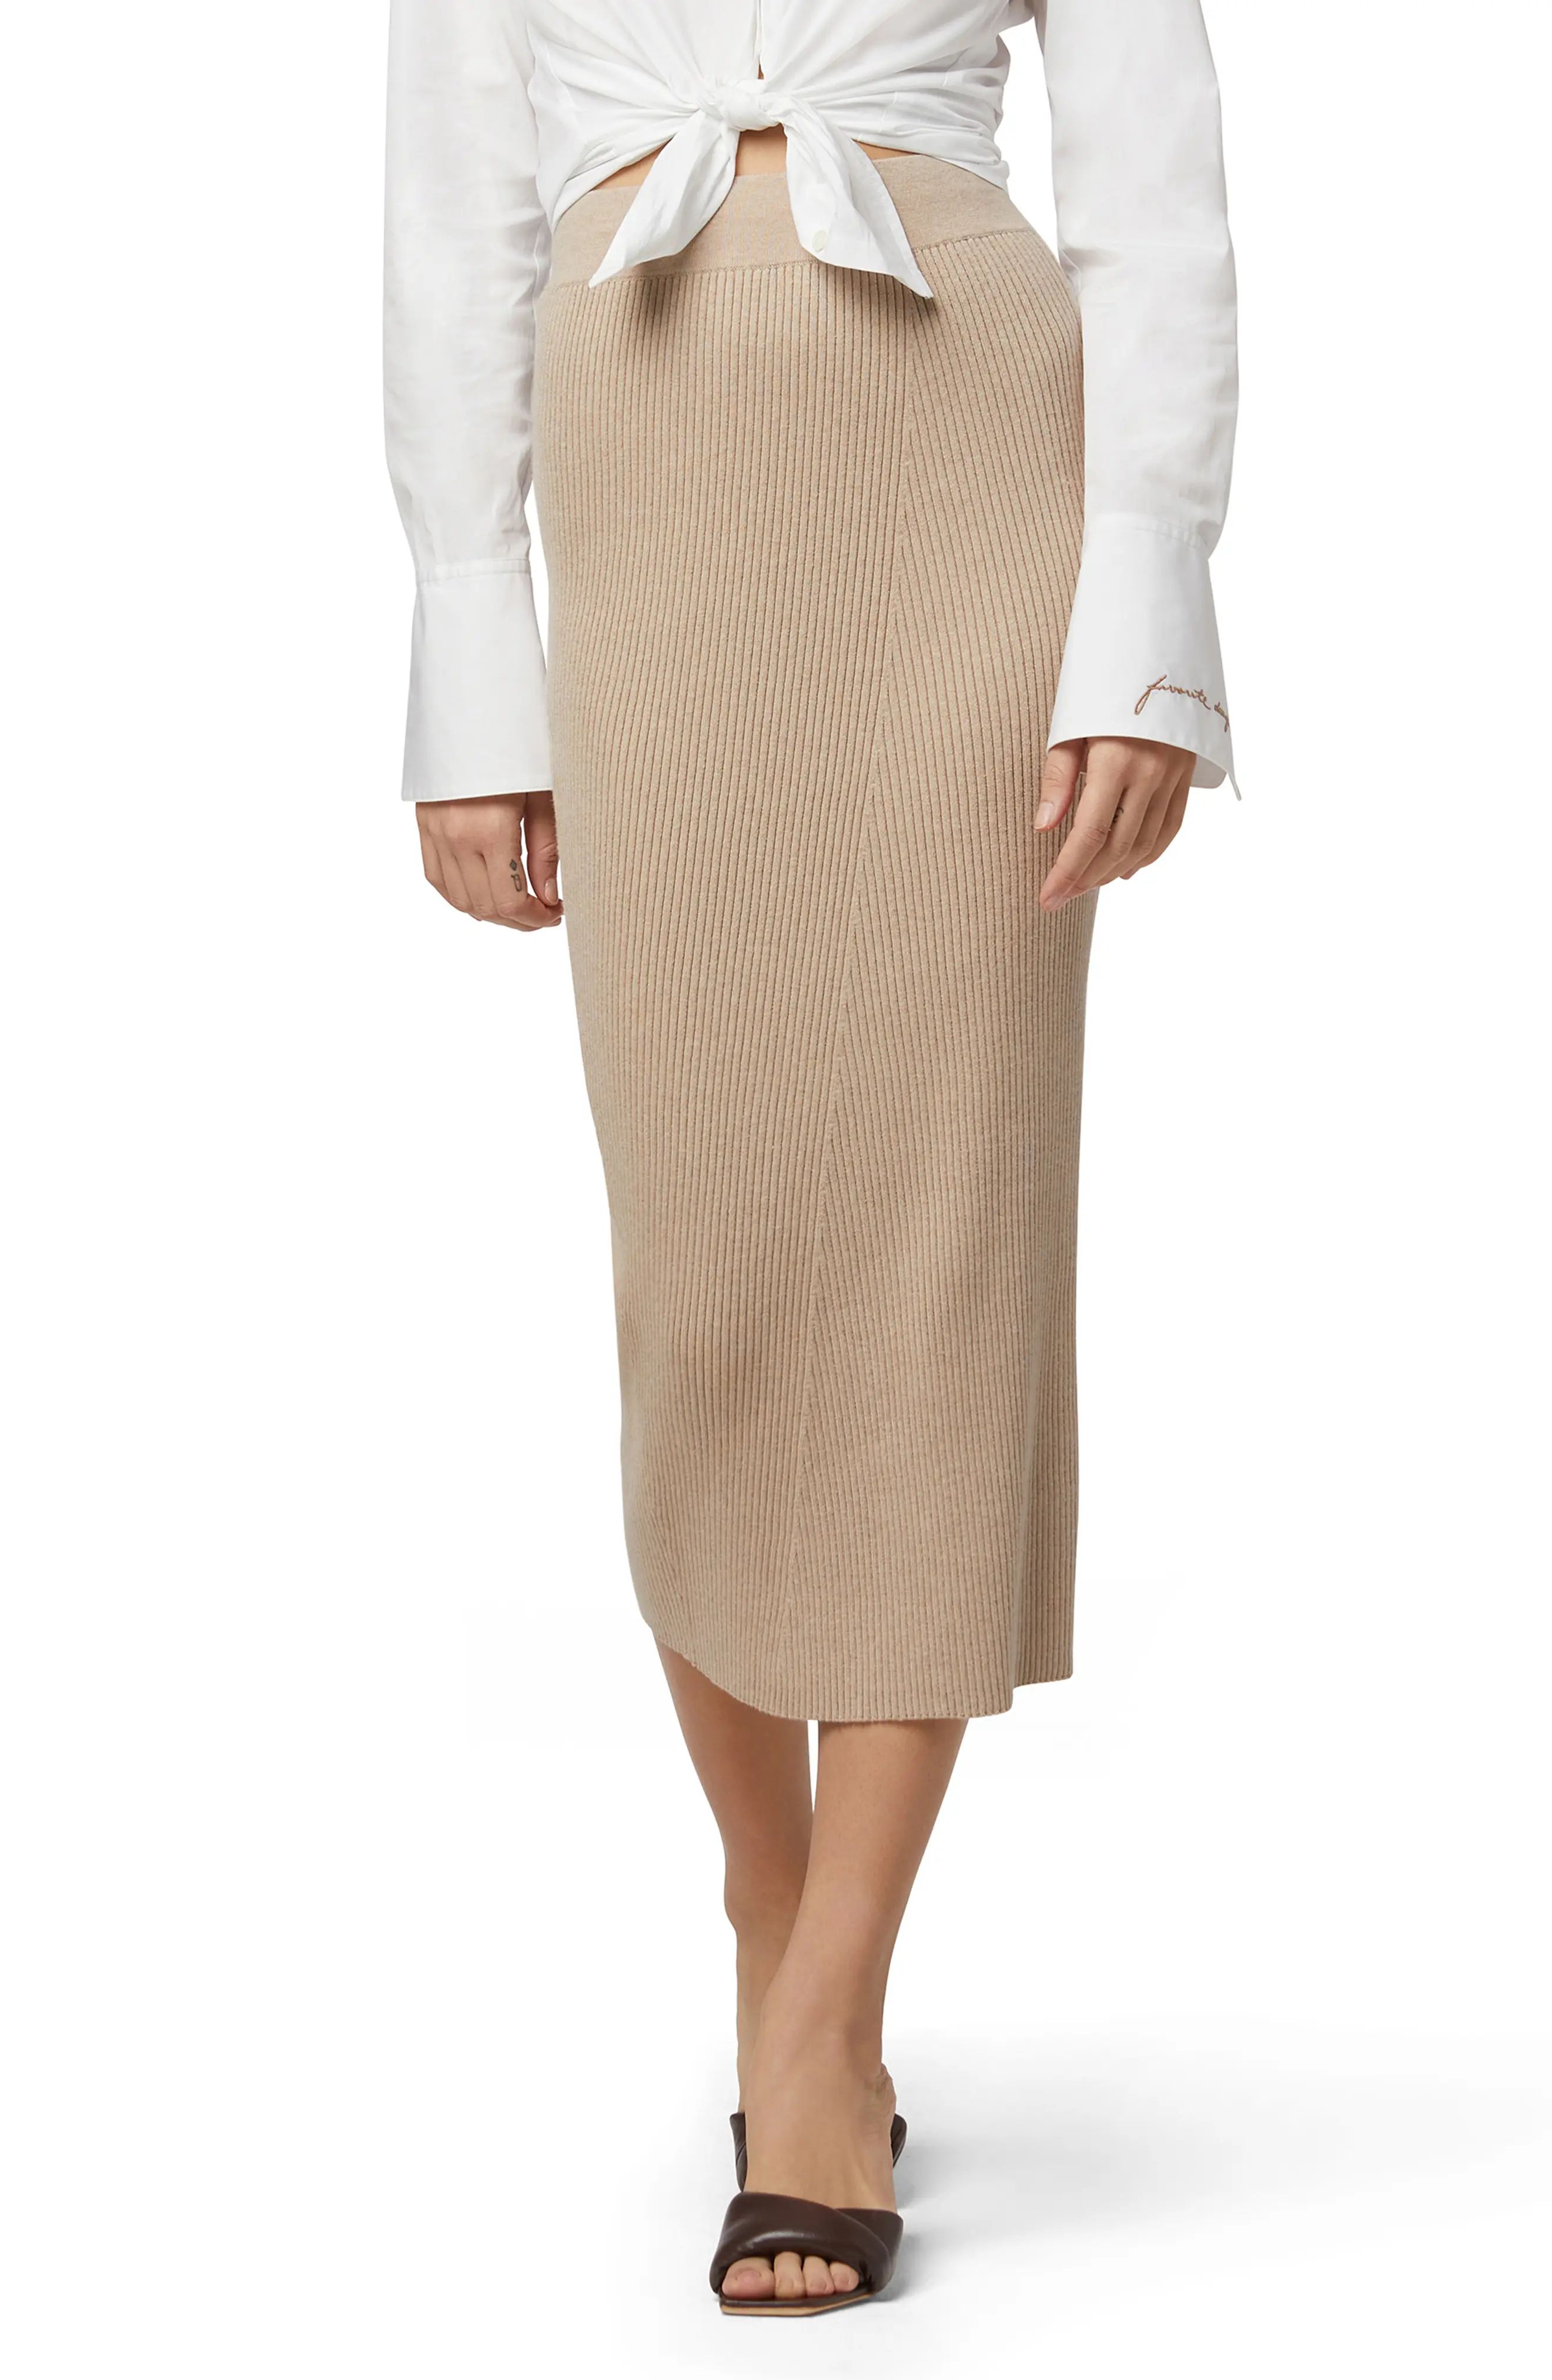 Favorite Daughter Ribbed Cotton & Cashmere Skirt in Beige at Nordstrom, Size Small | Nordstrom